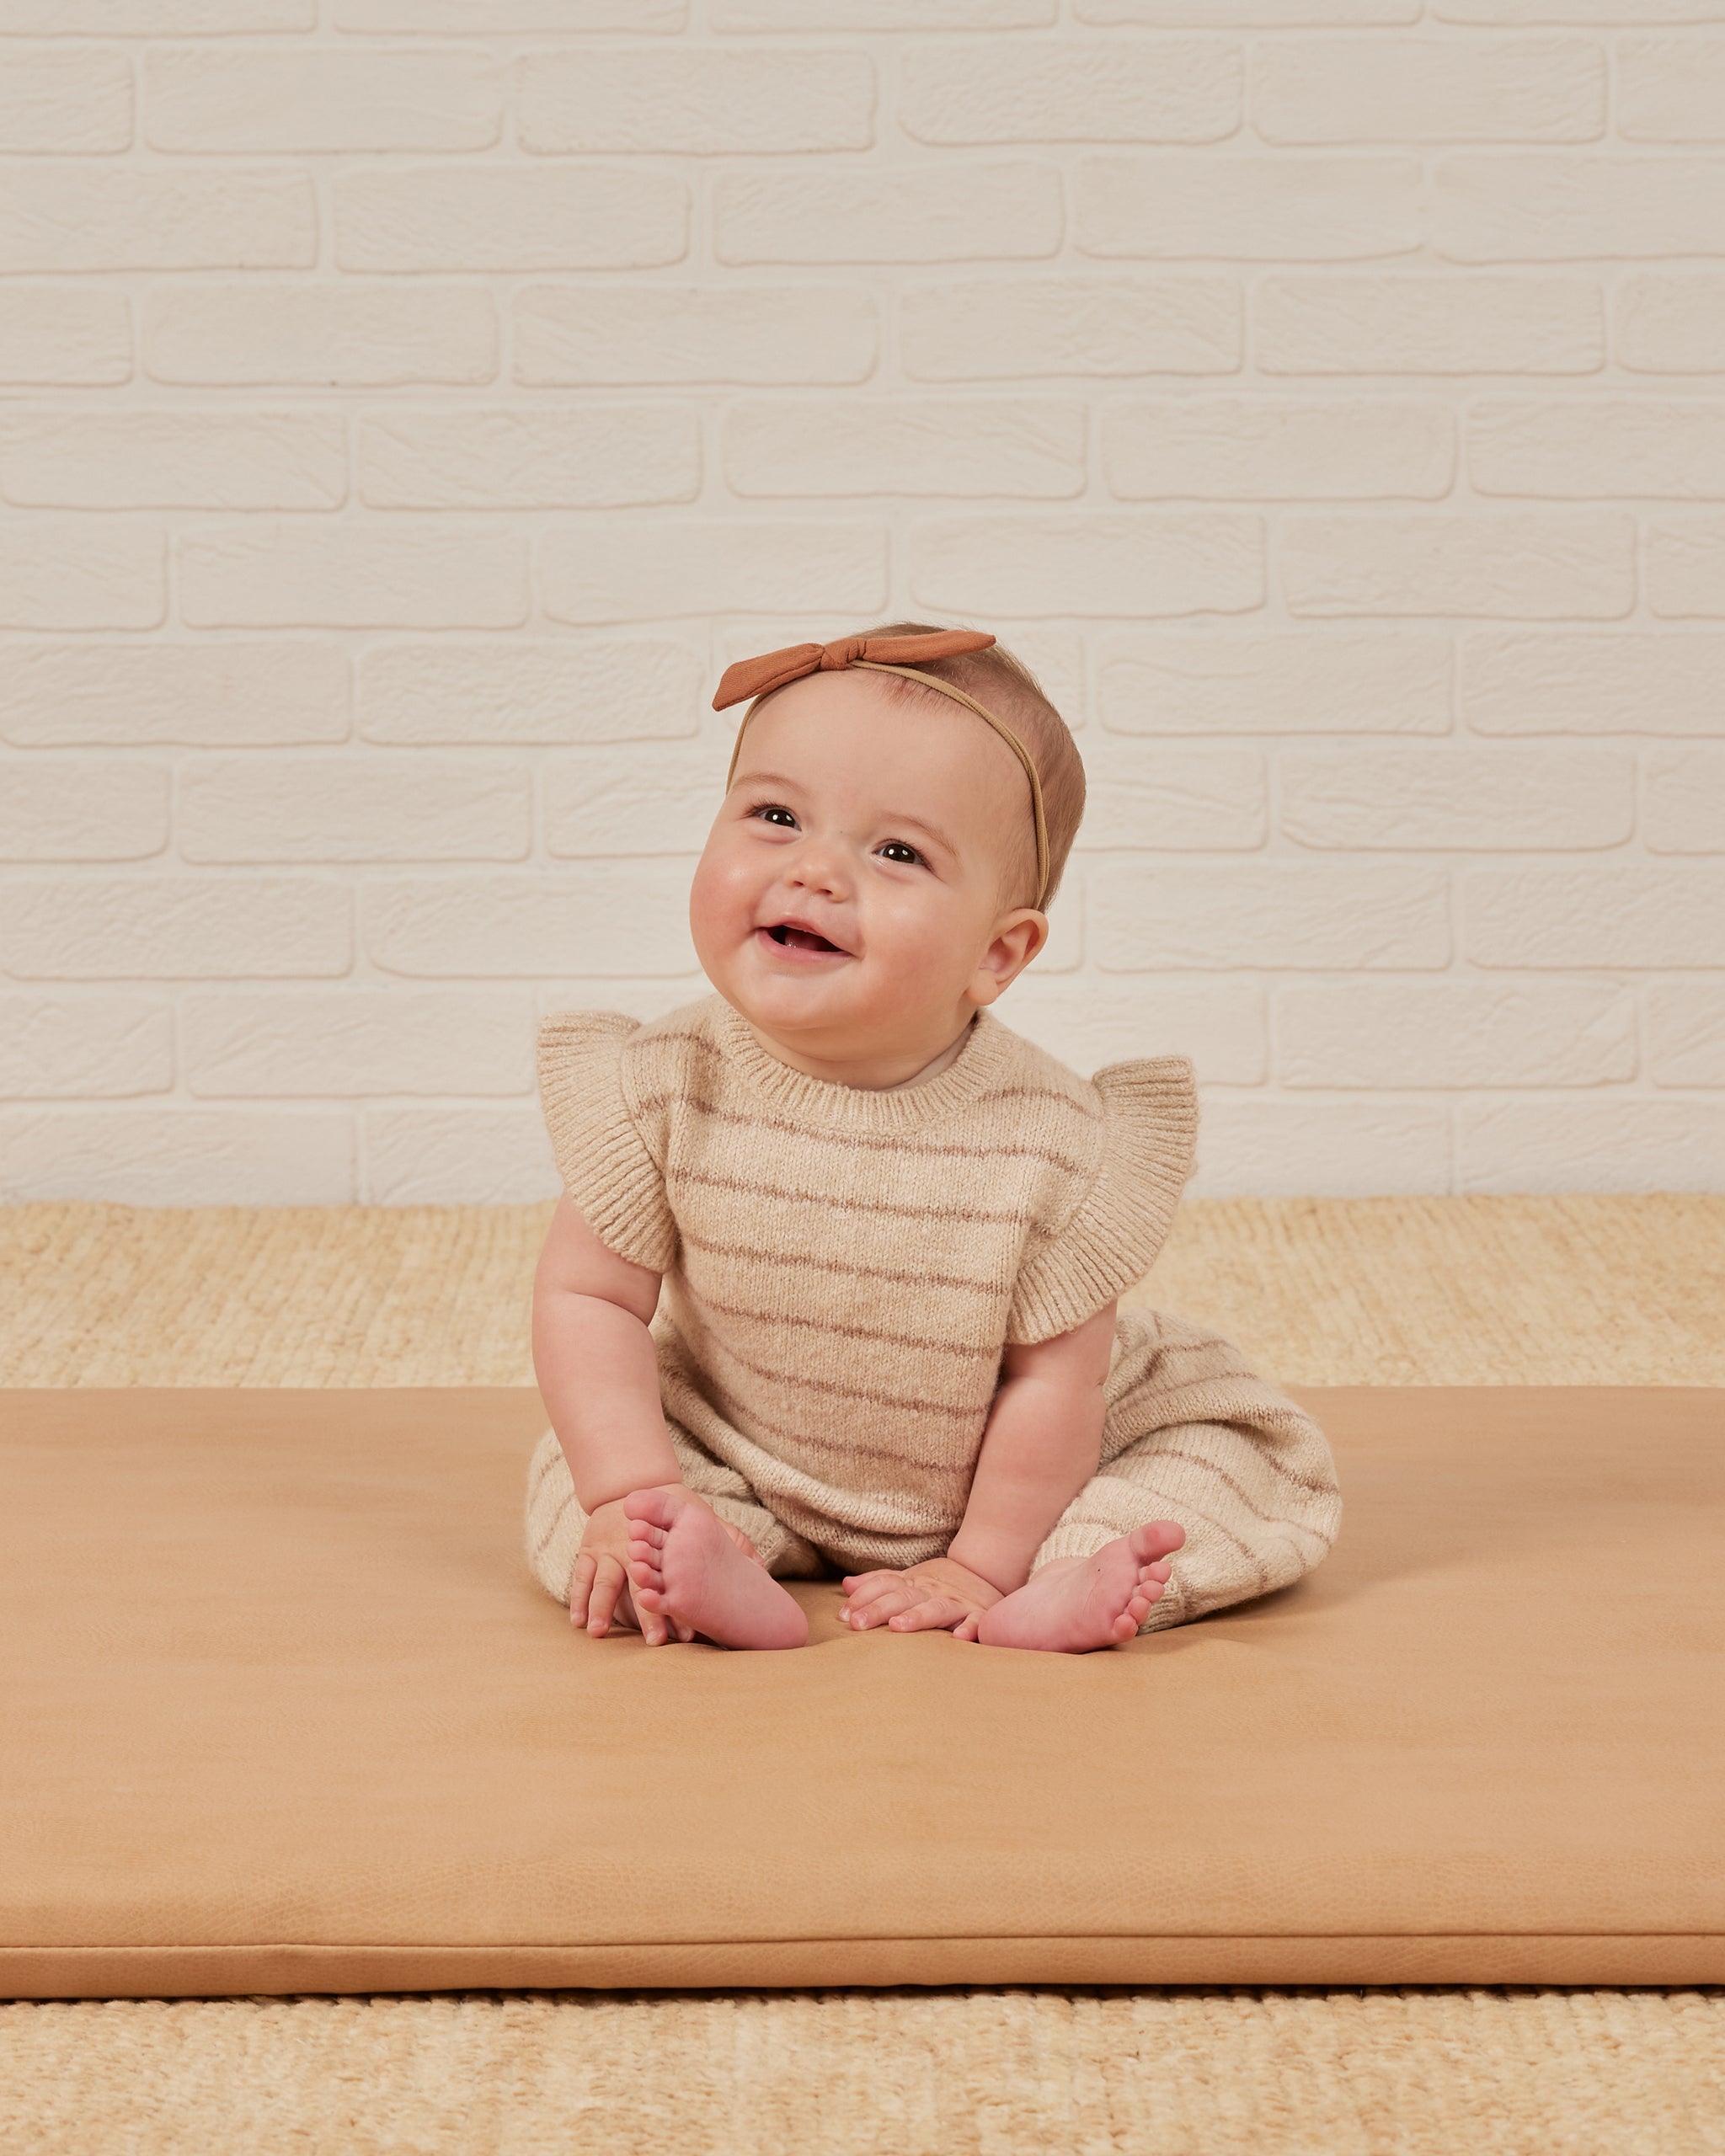 Mira Knit Romper || Heathered Oat Stripe - Rylee + Cru | Kids Clothes | Trendy Baby Clothes | Modern Infant Outfits |